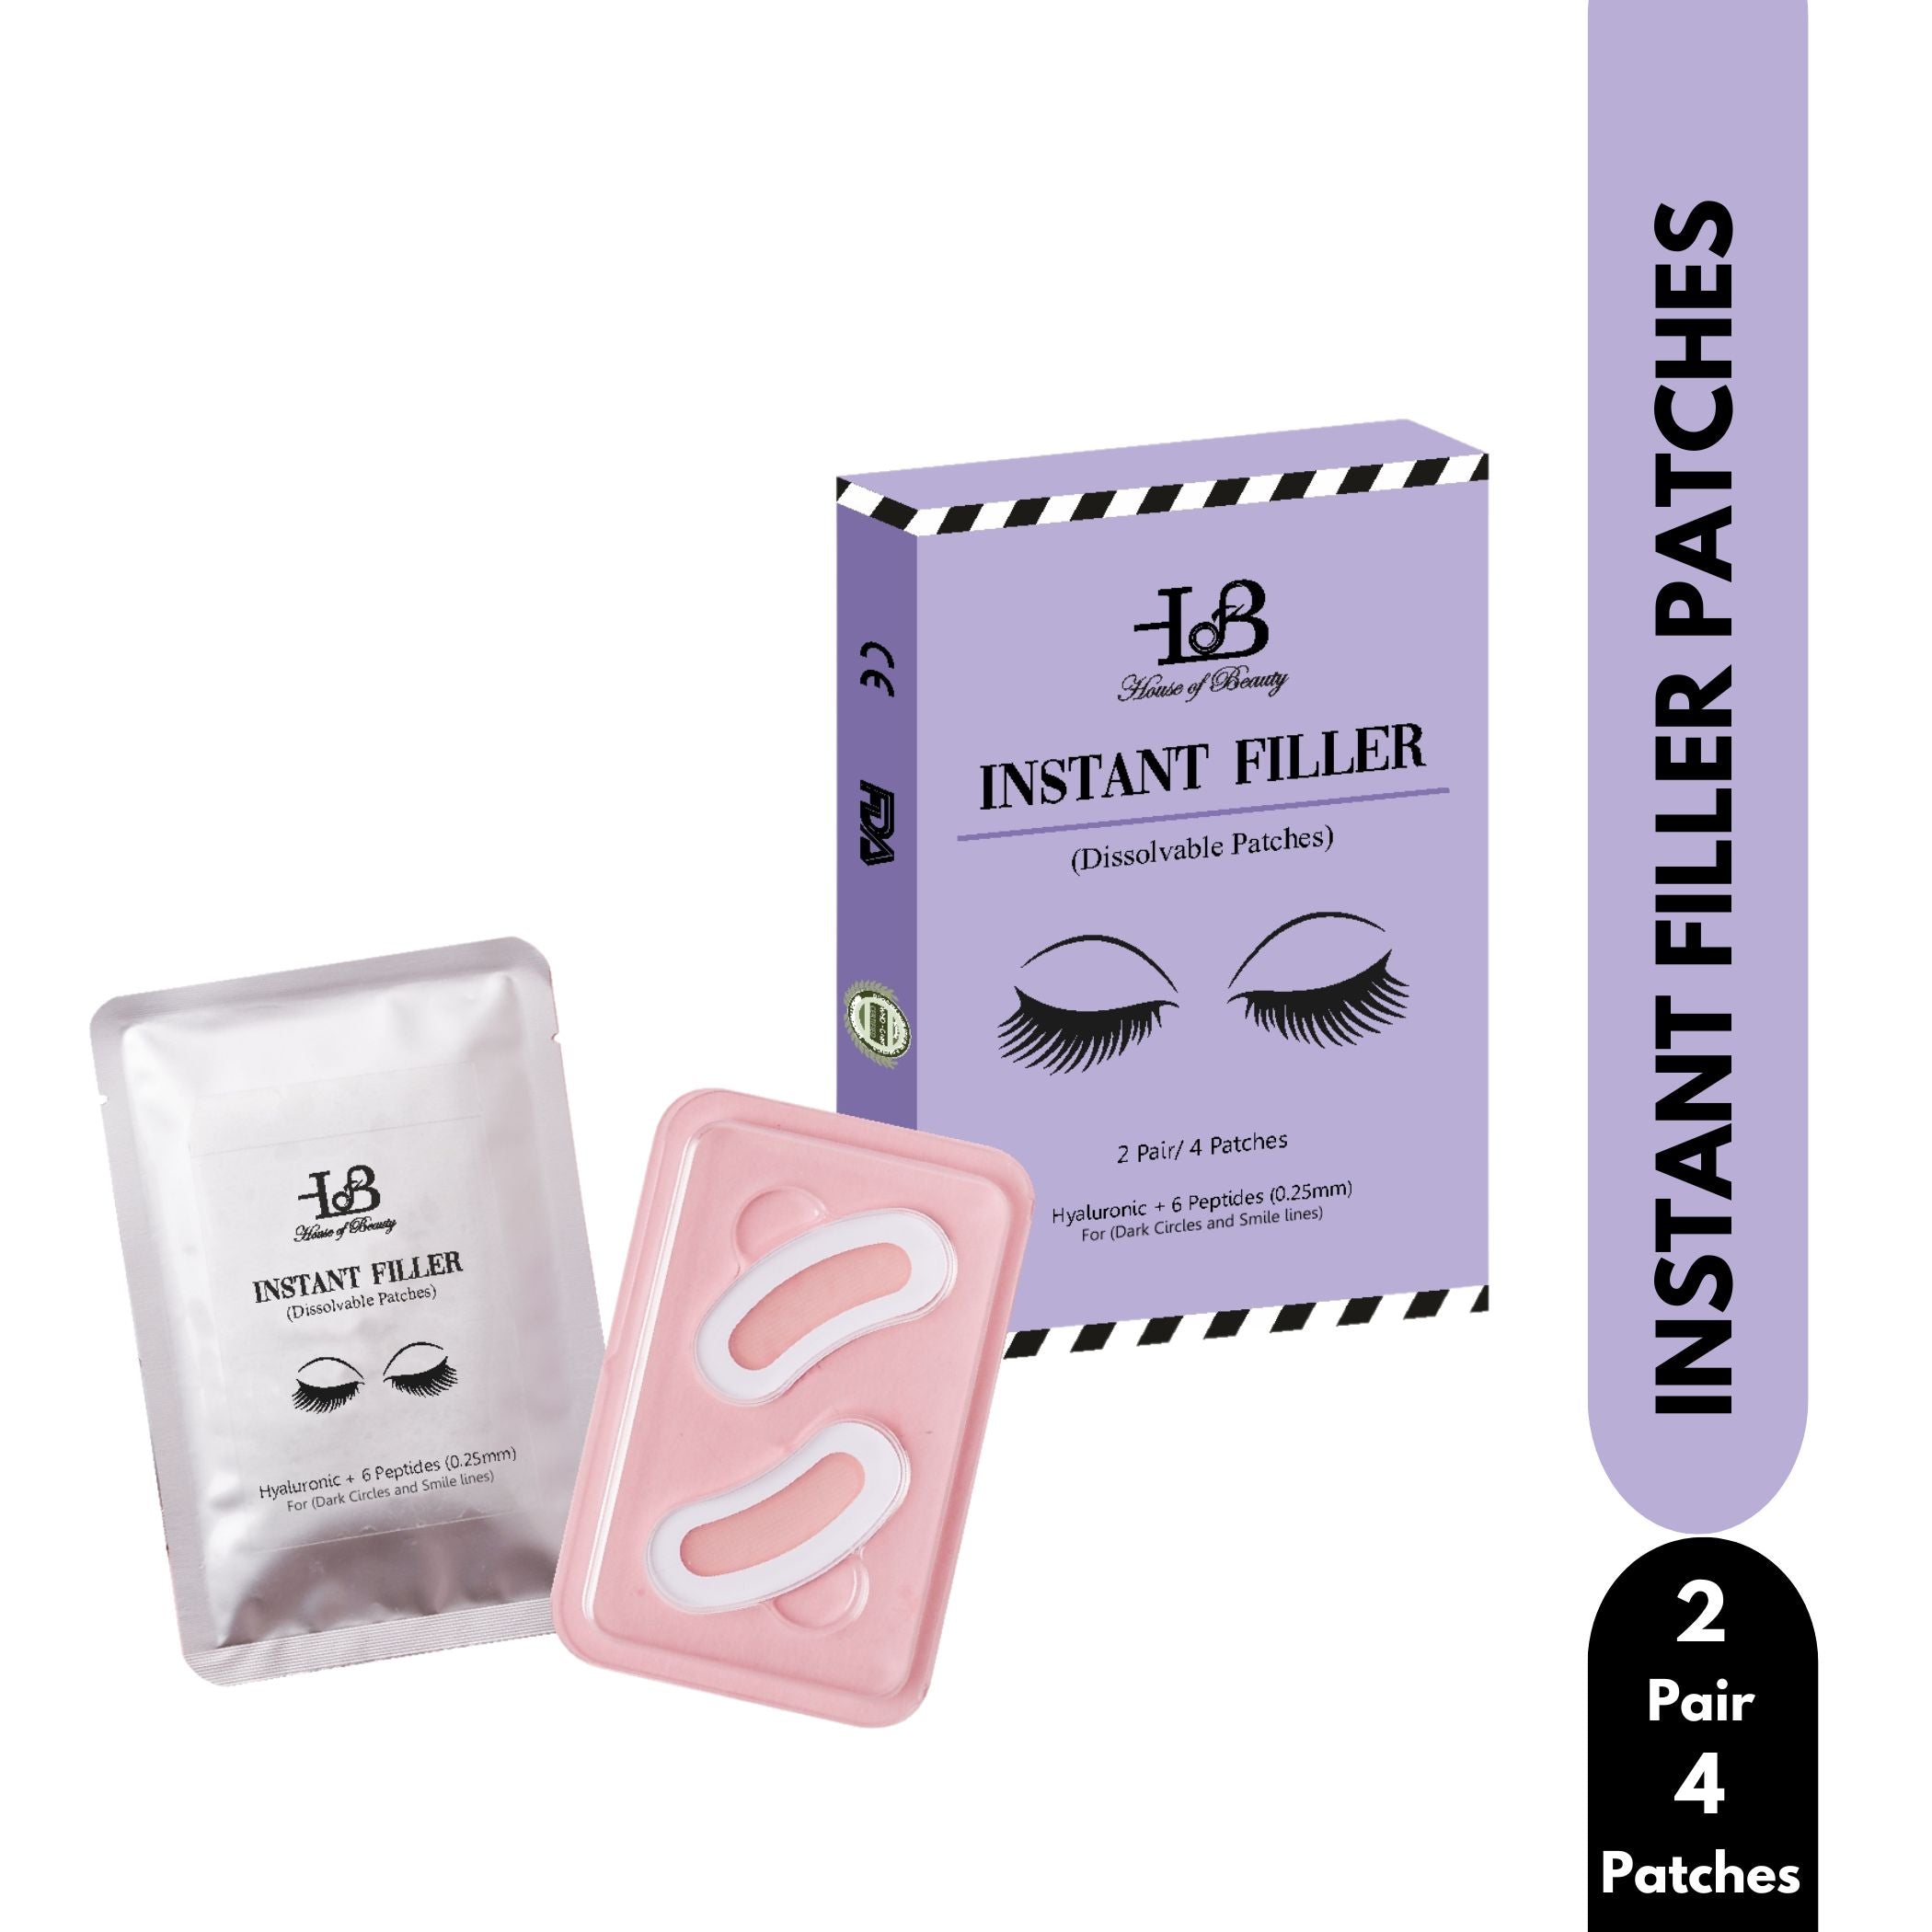 Instant Filler - Dissolvable Patches 0.25mm (2 pairs)